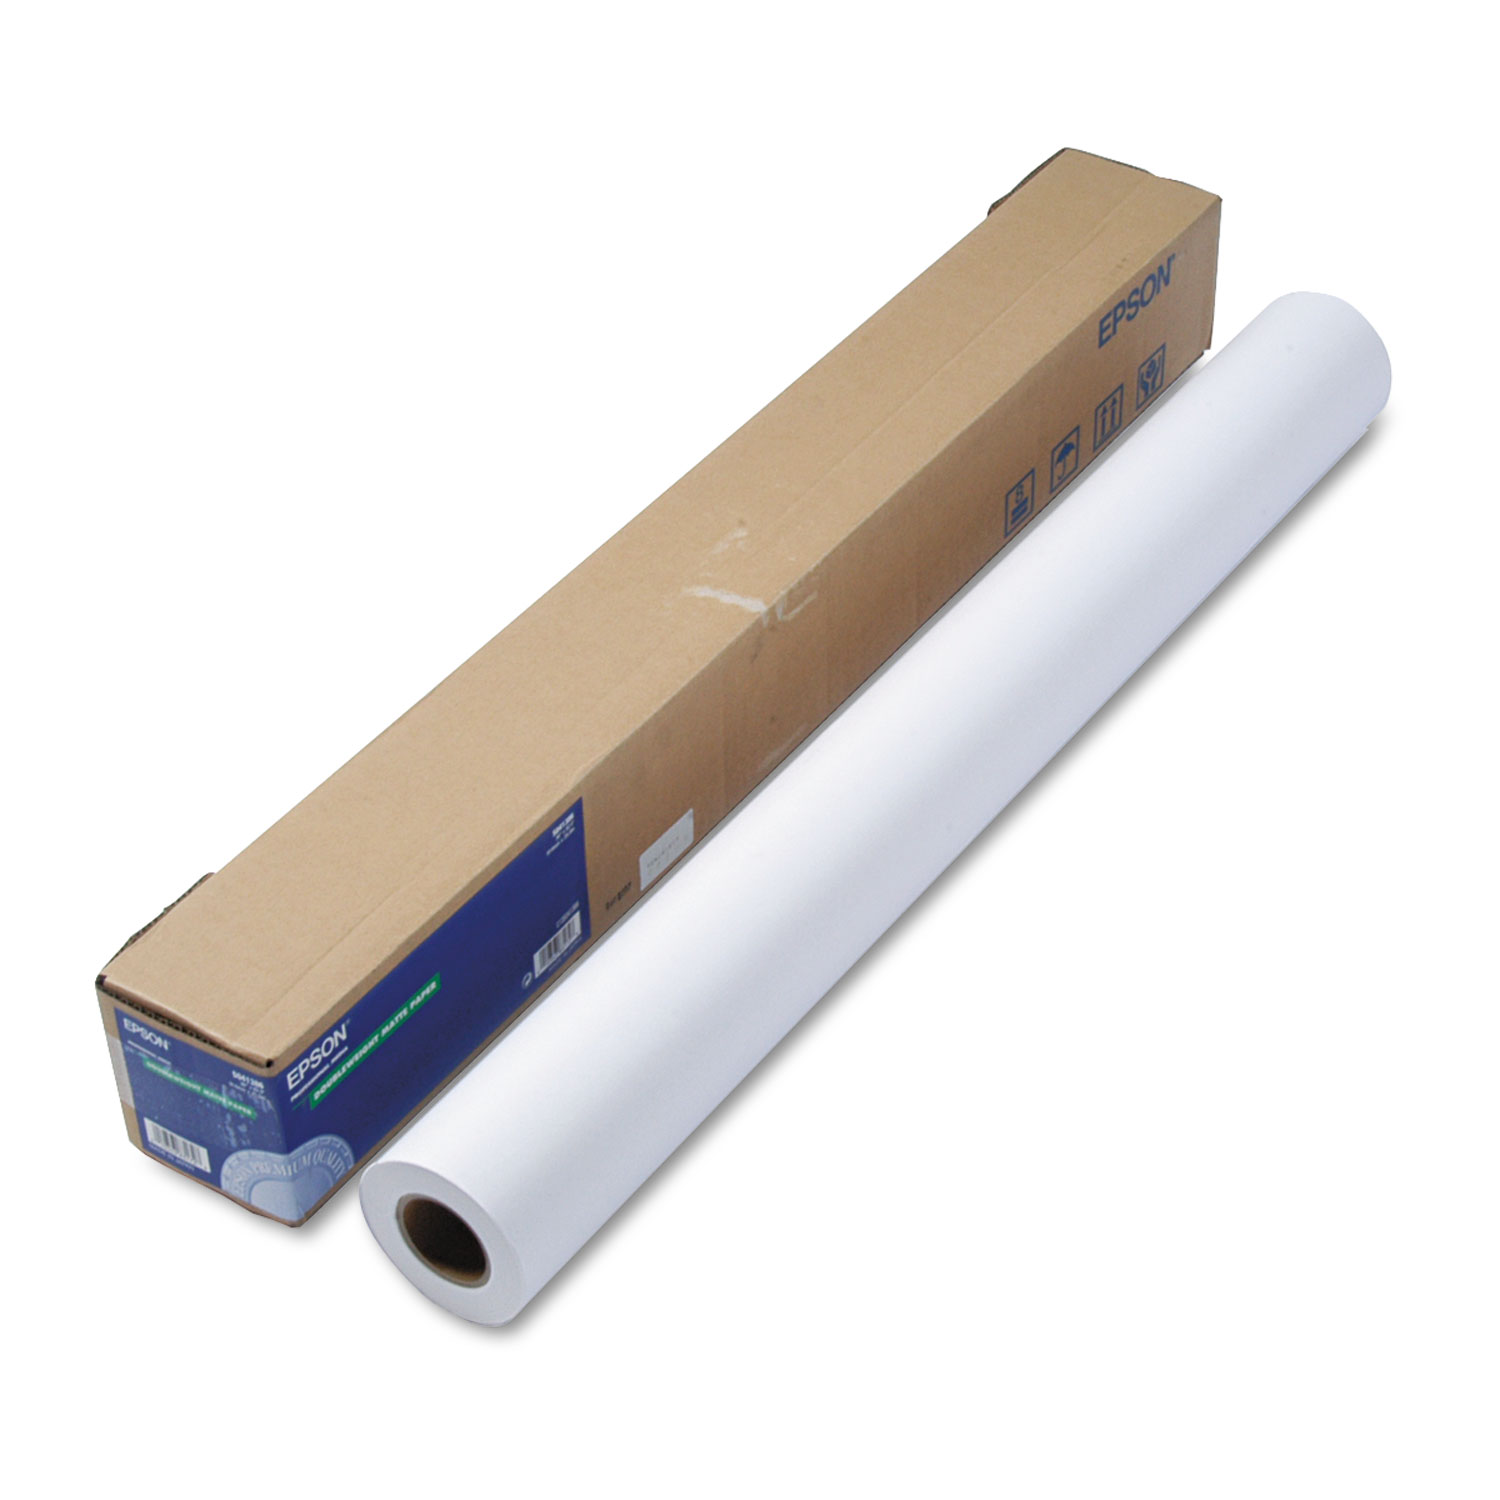 Non-Glare Matte-Finish Inkjet Paper, Double-Weight, 36 x 82ft Roll